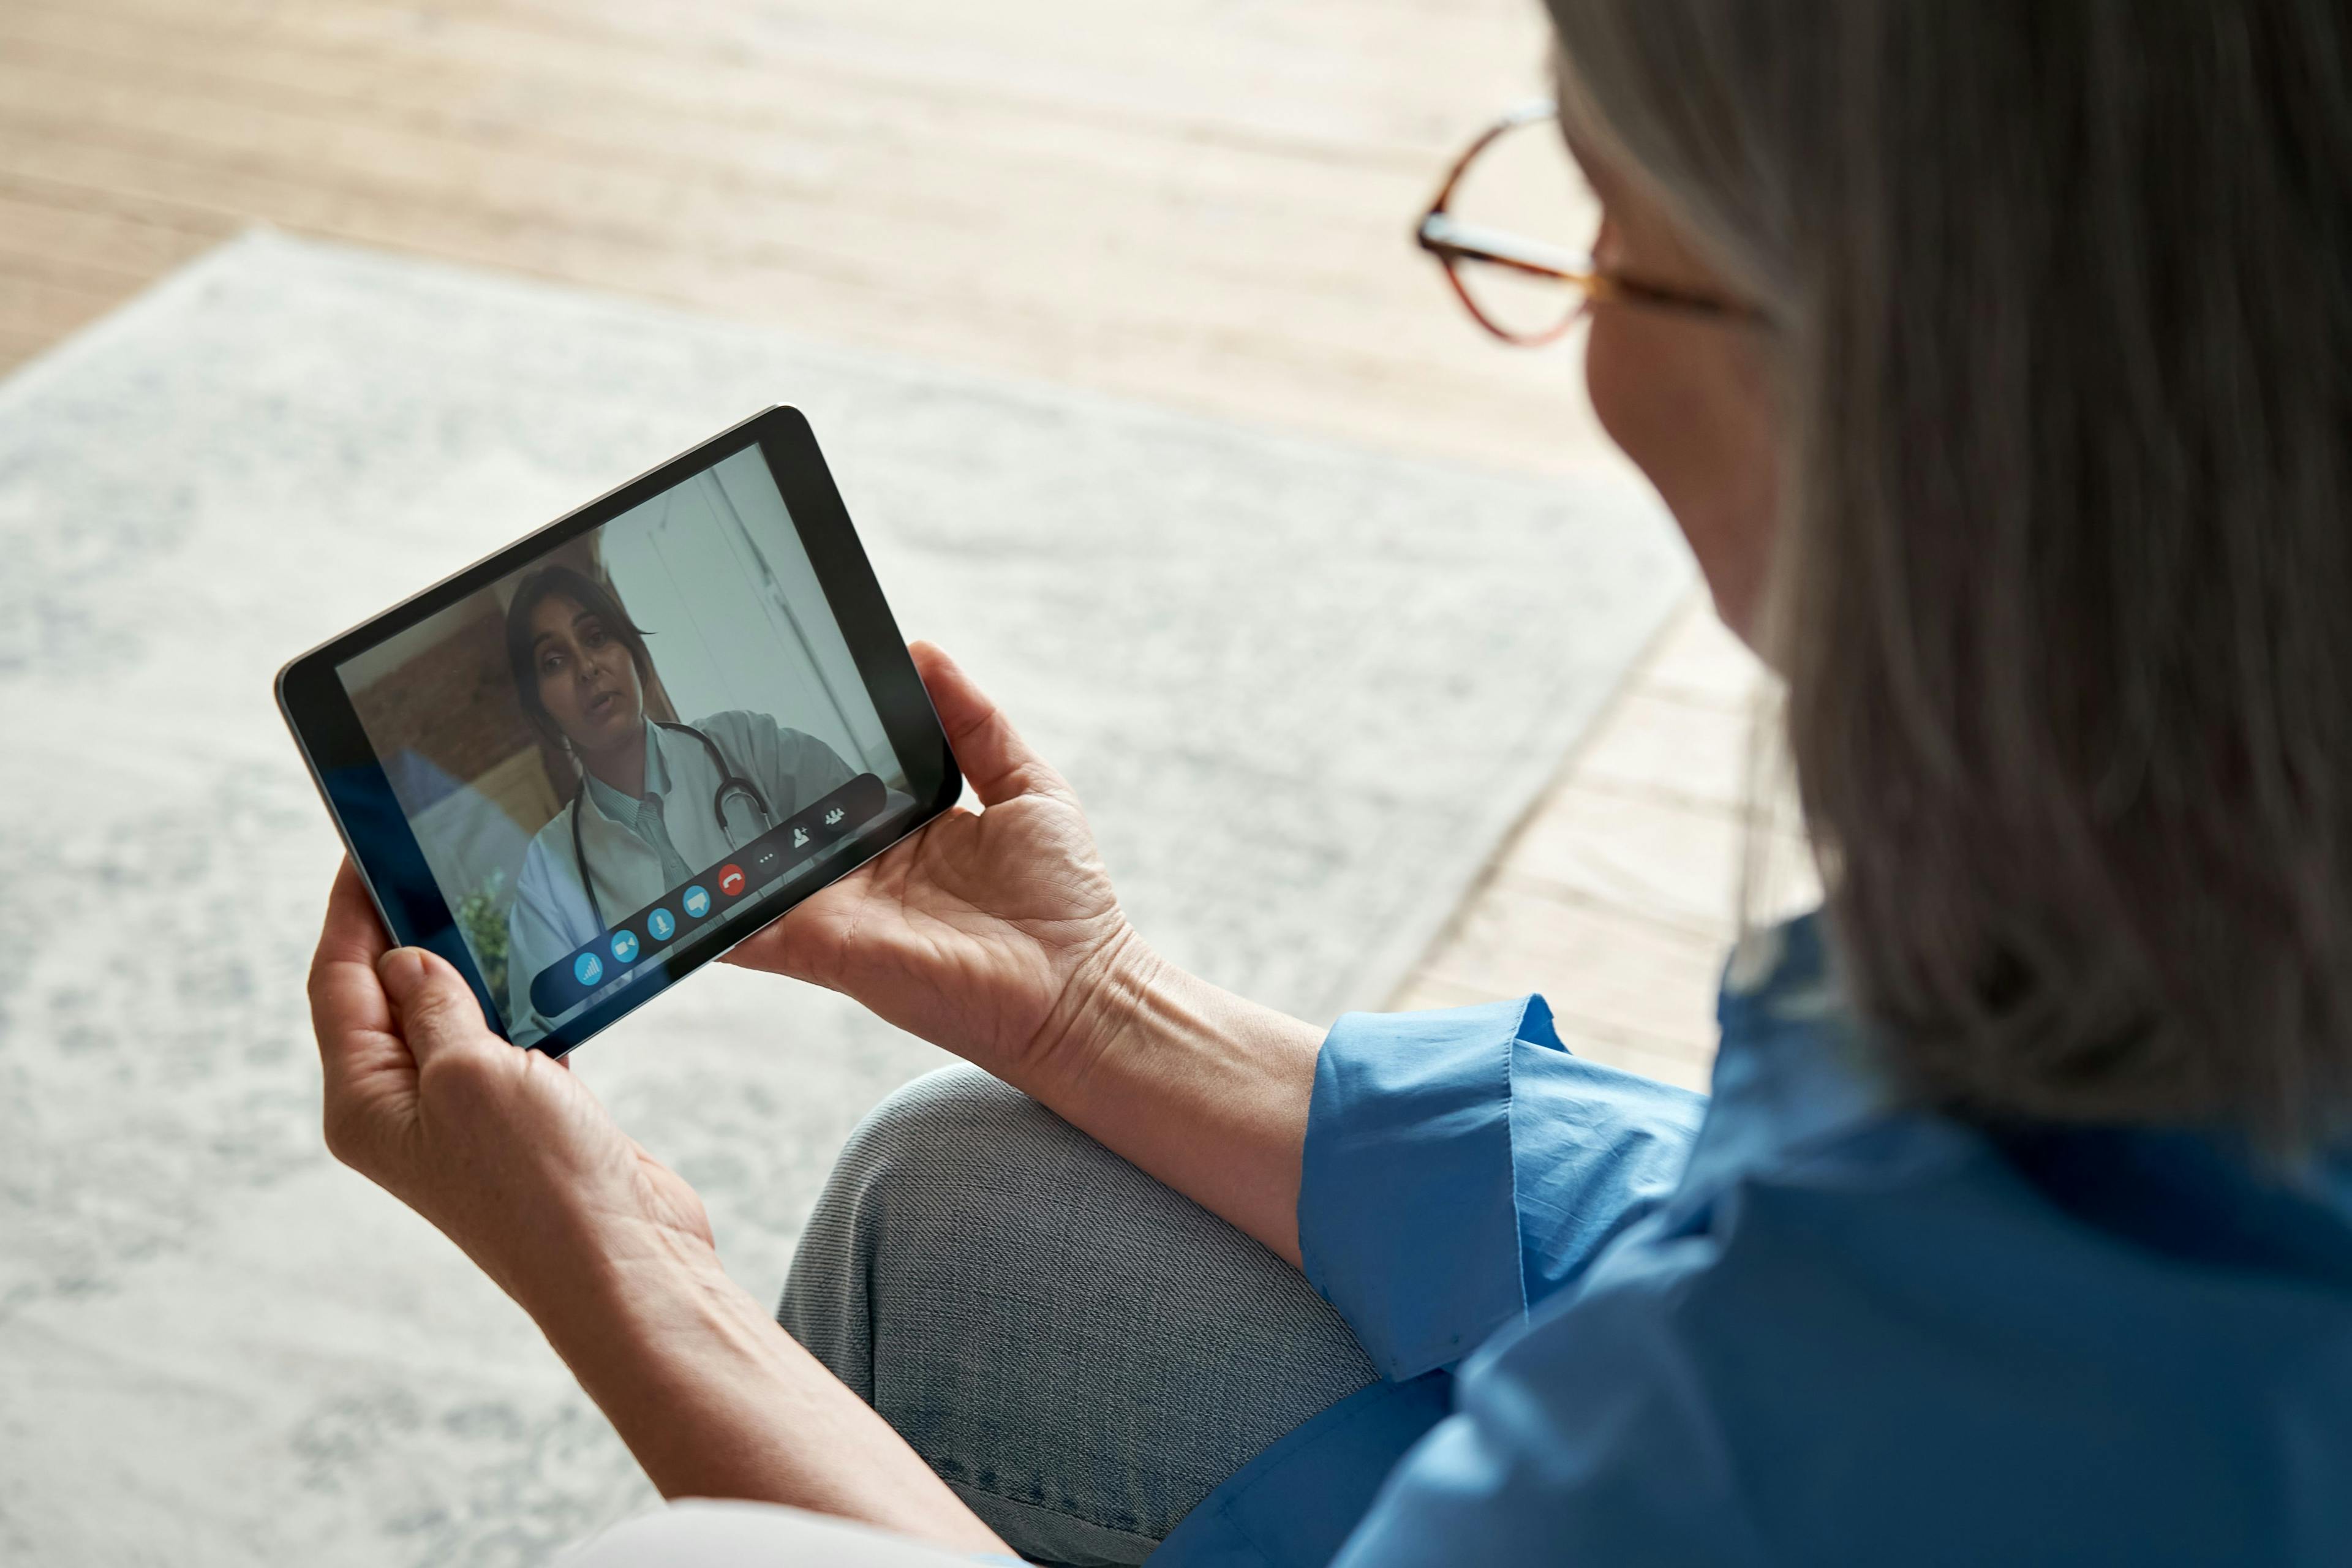 The Role of Technology in Addressing Isolation of Older Adults